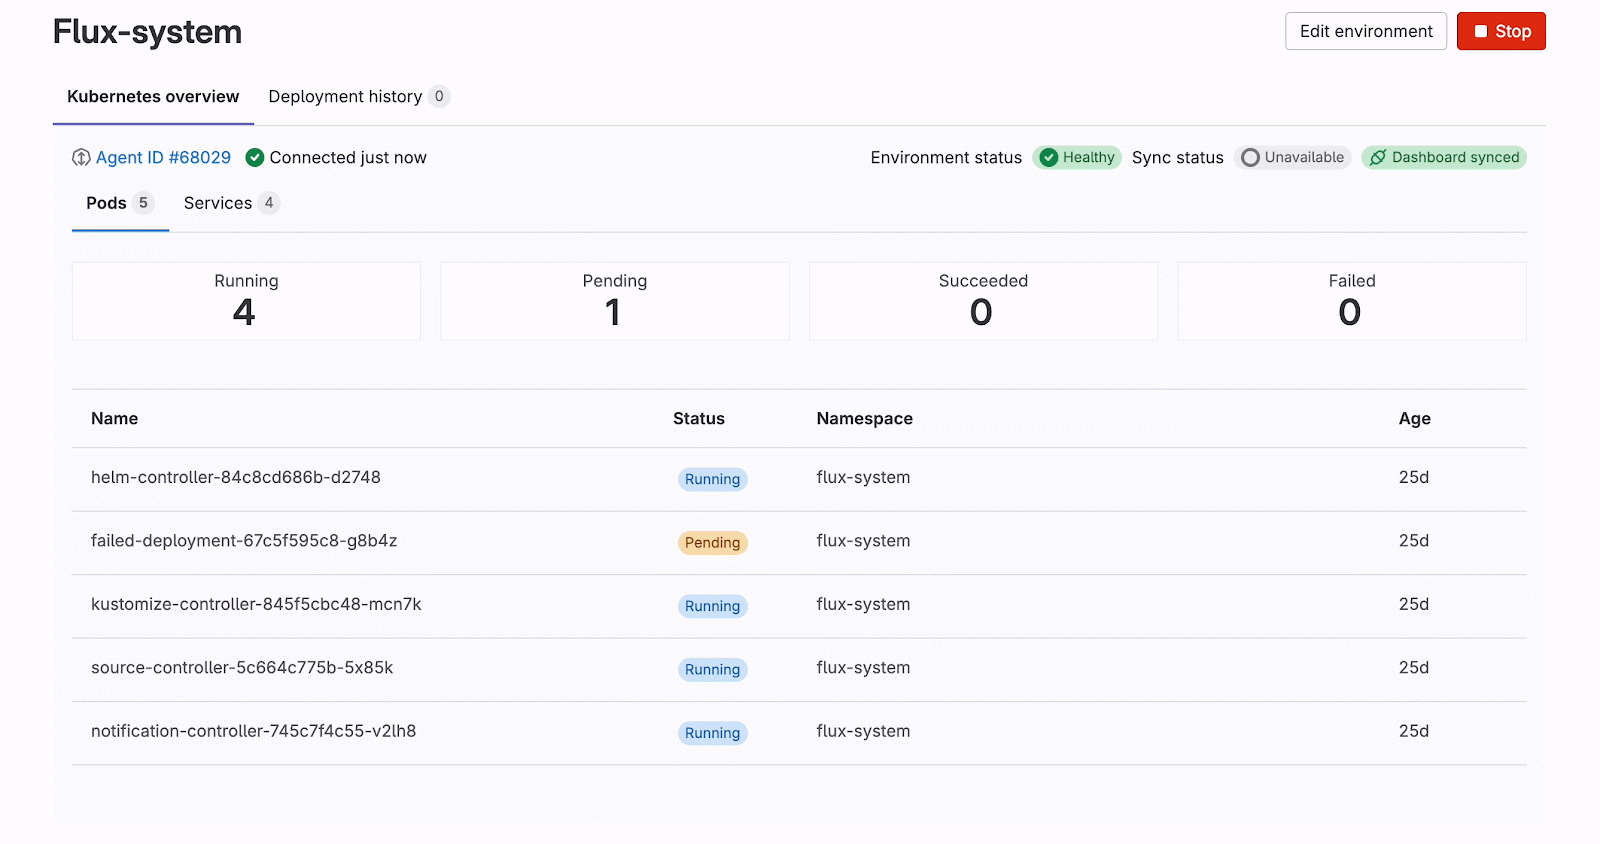 Kubernetes overview - states of connection status